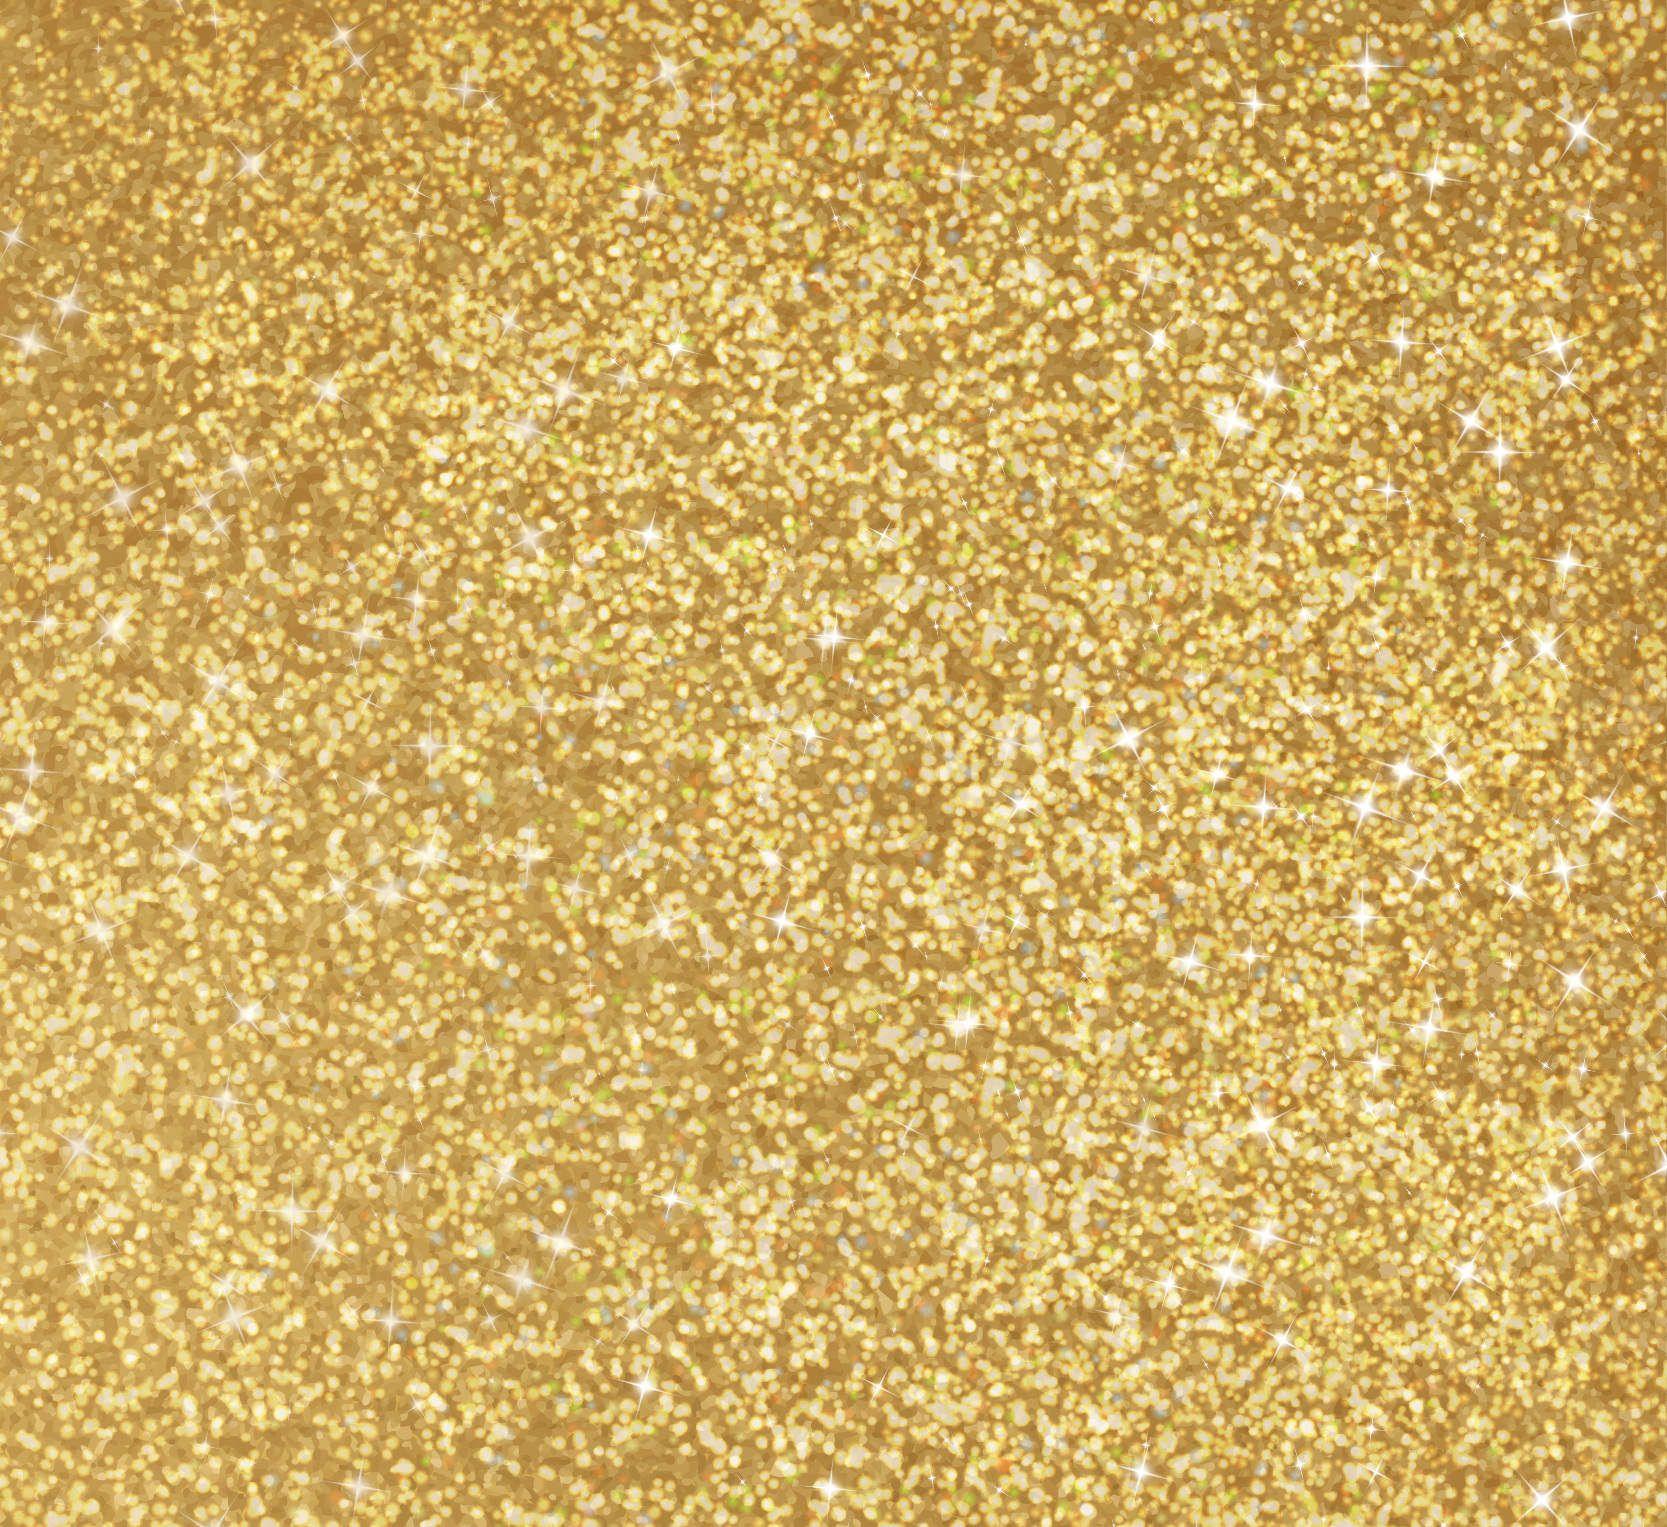 glitter gold background 6. Background Check All